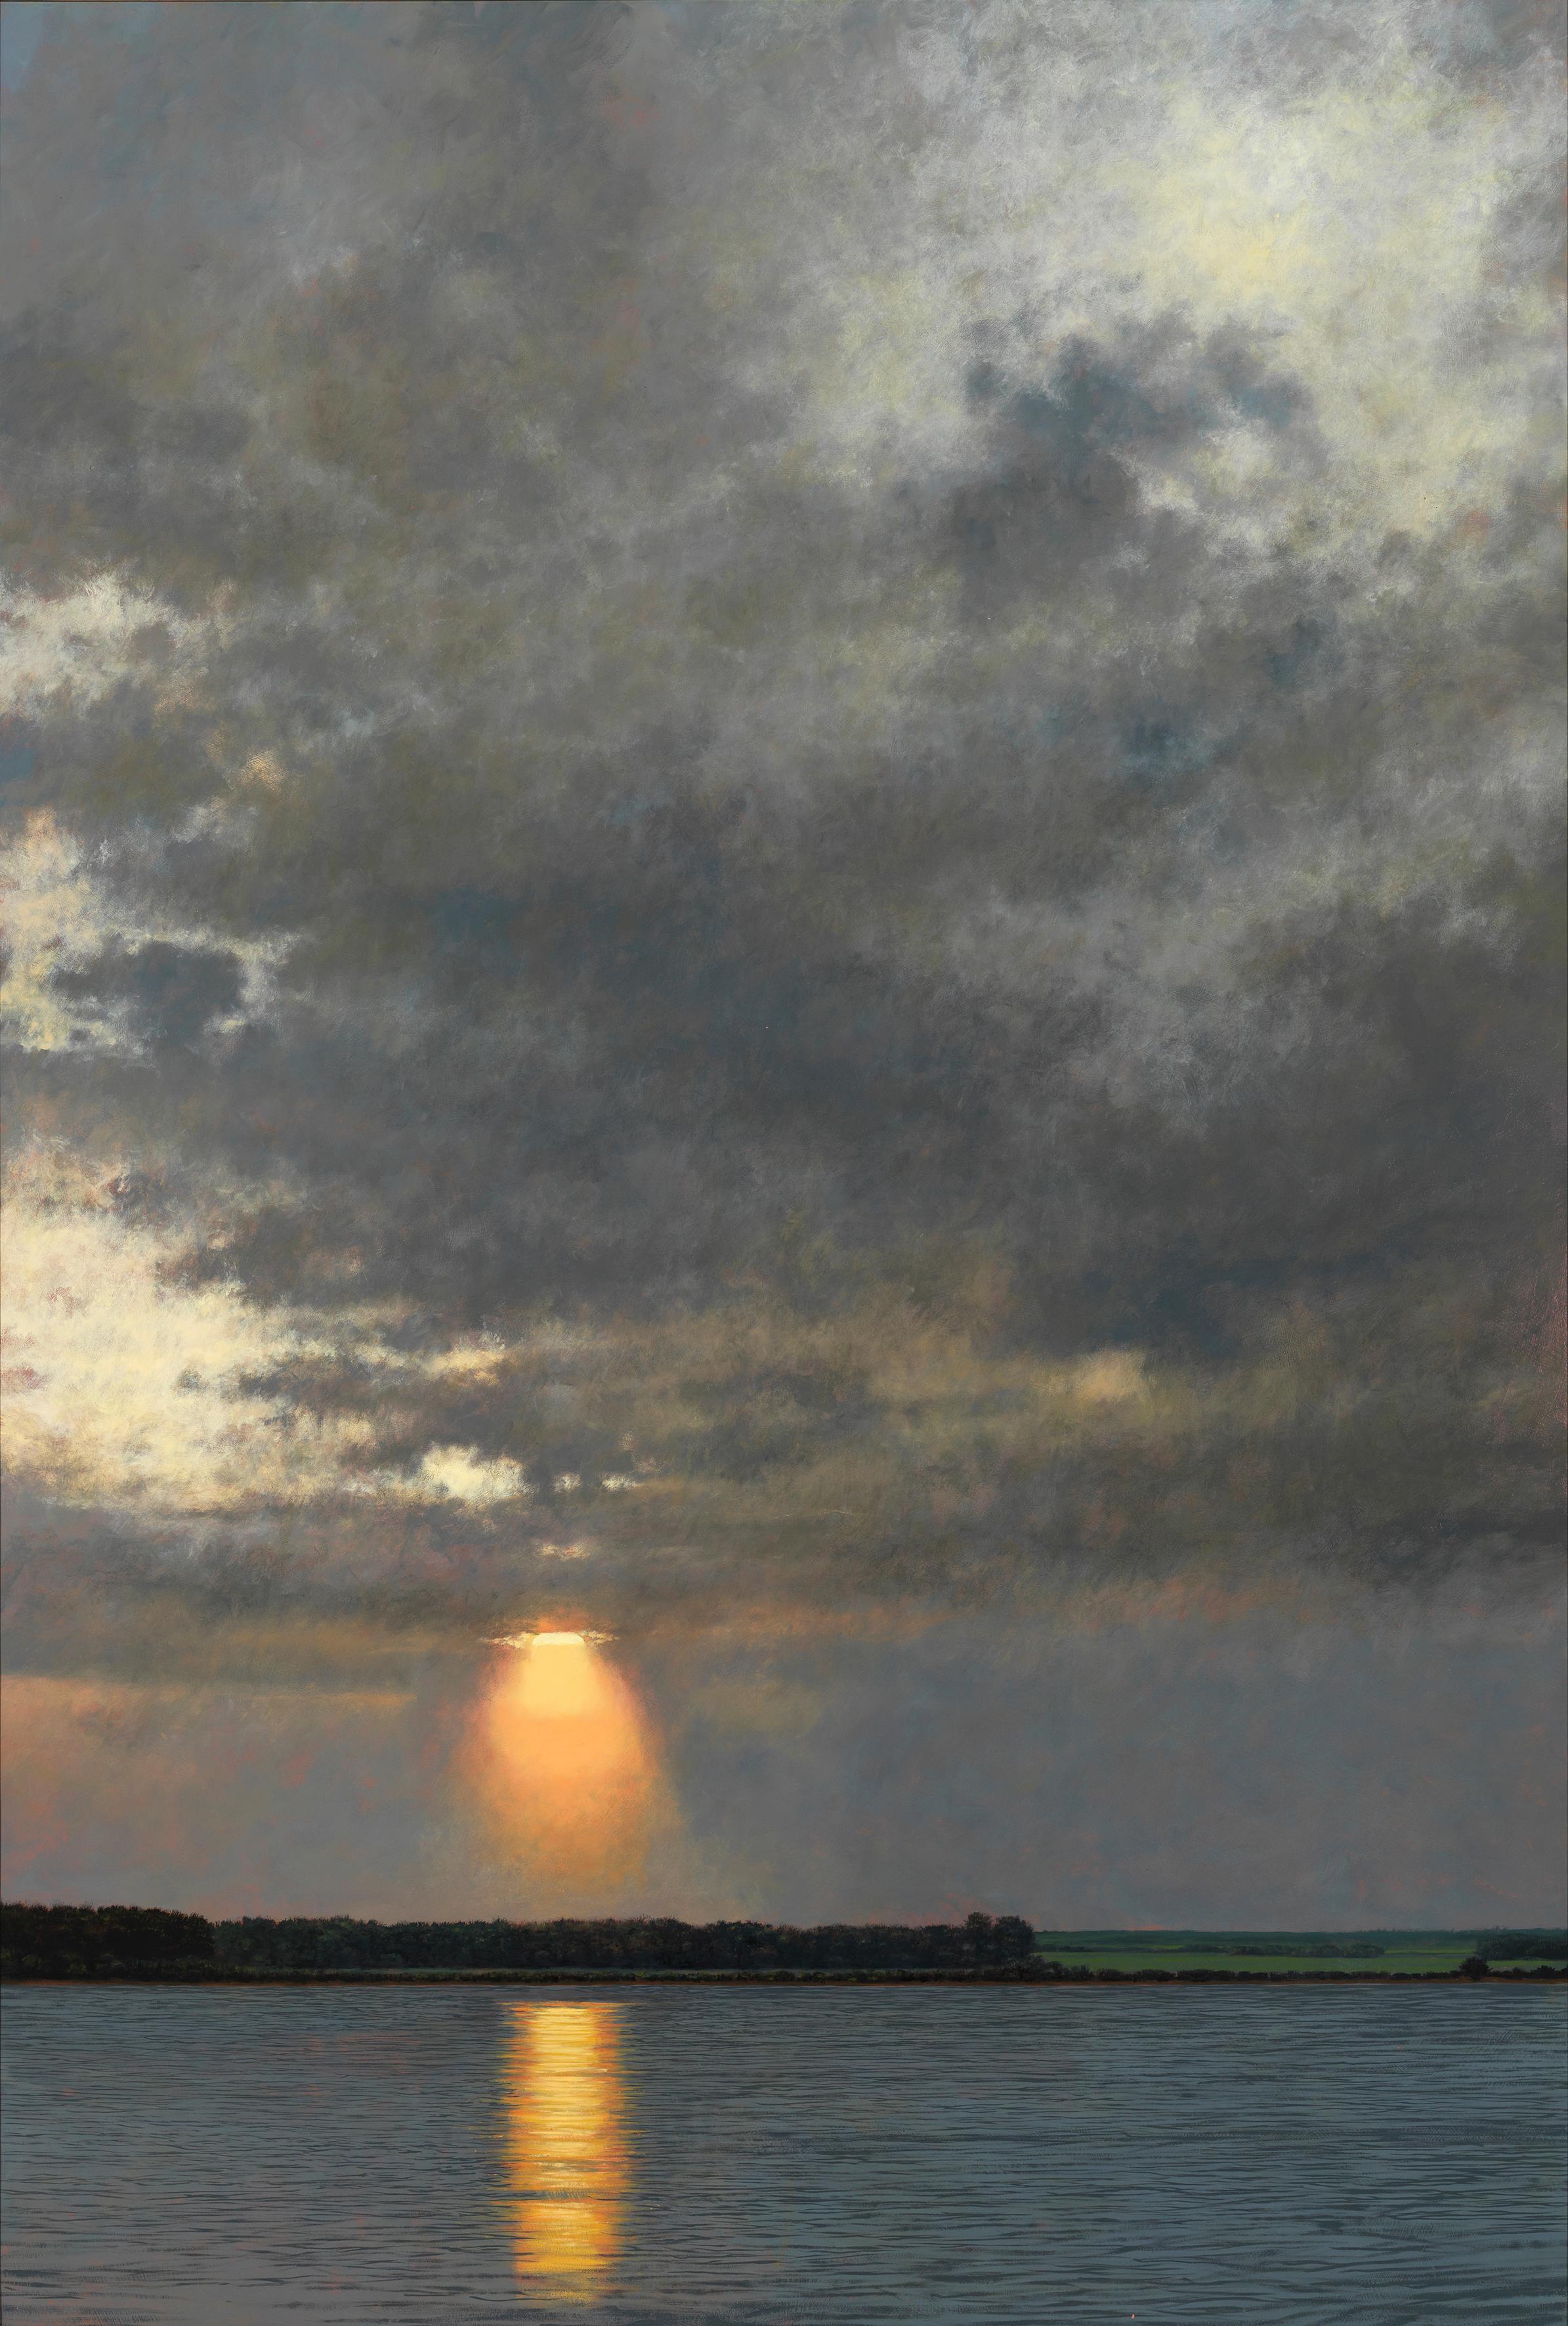 Jeff Aeling Landscape Painting - Setting Sun - Sun Peaking Through a Cloudy Sky Over a Lake, Large Oil on Panel